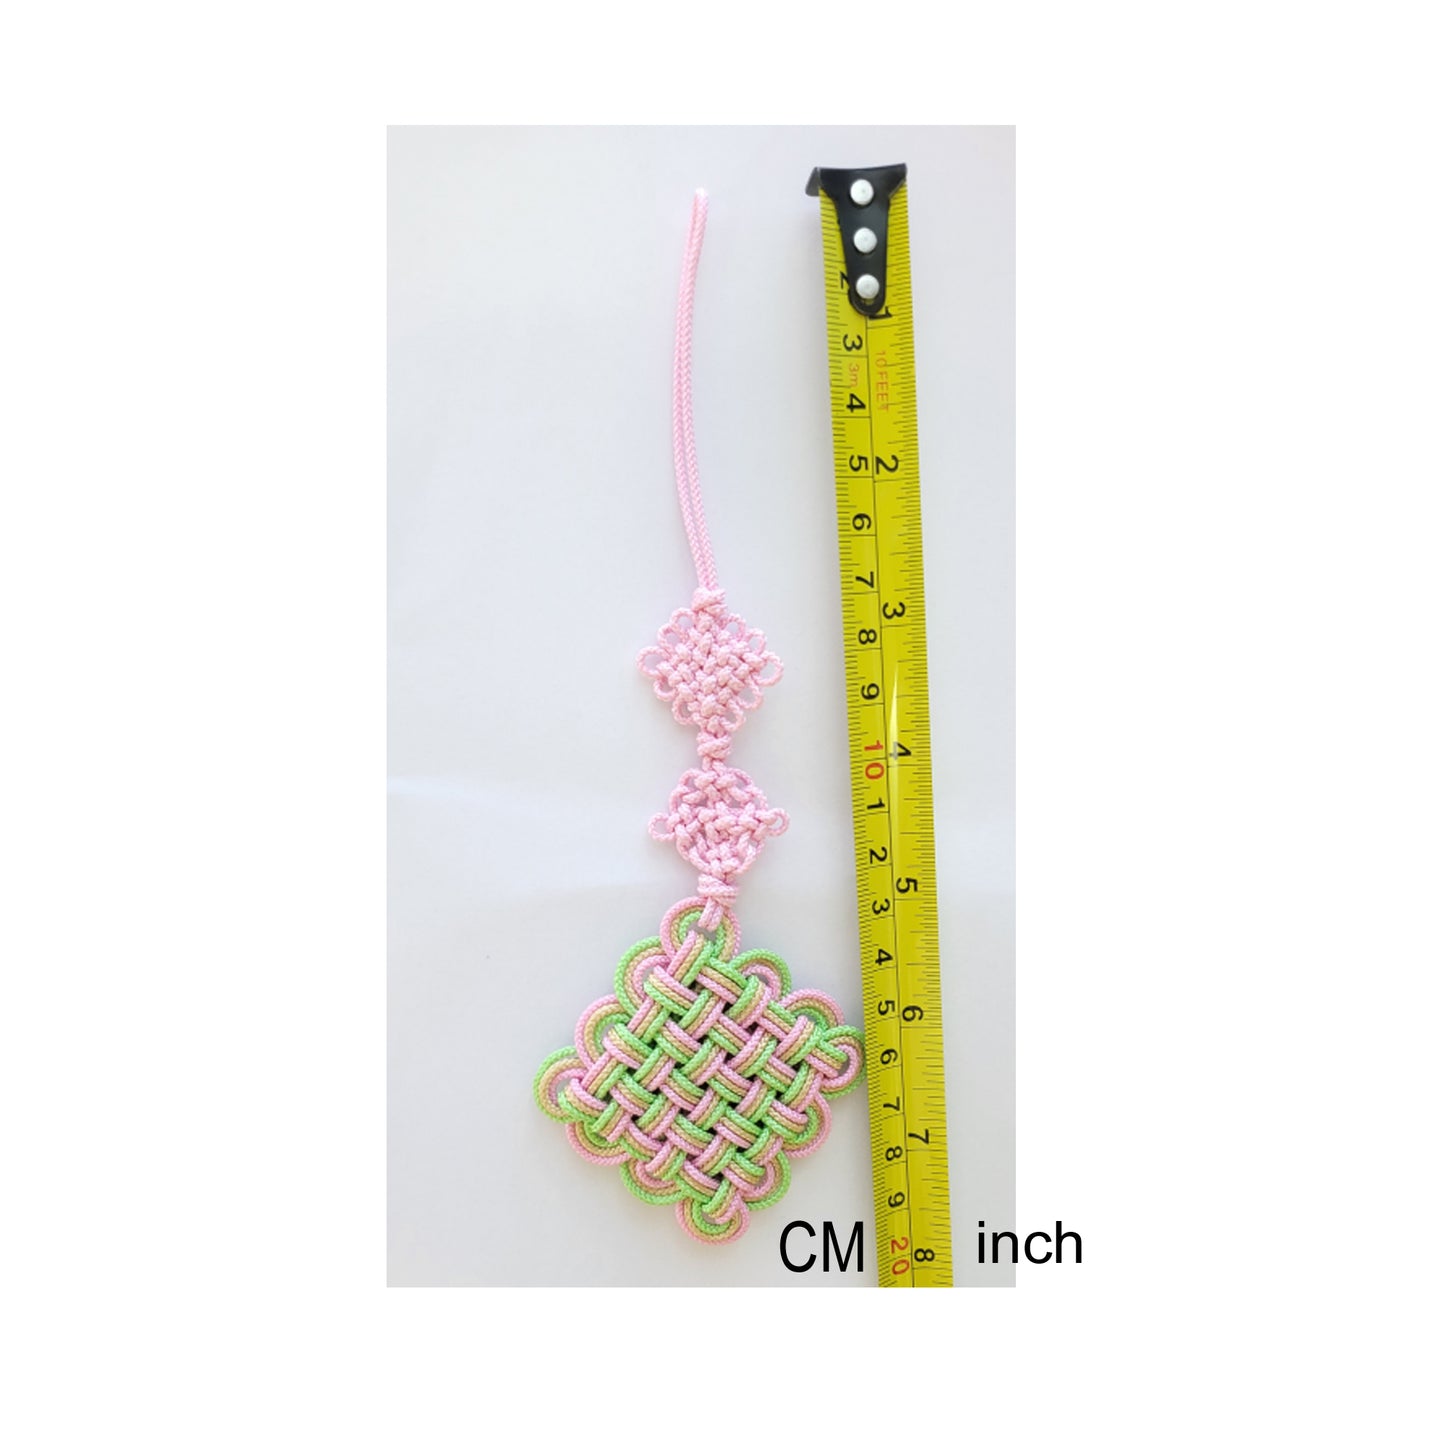 Handmade Keyring, Charm, Ornament, Korean Traditional Knot, Pink and Mint